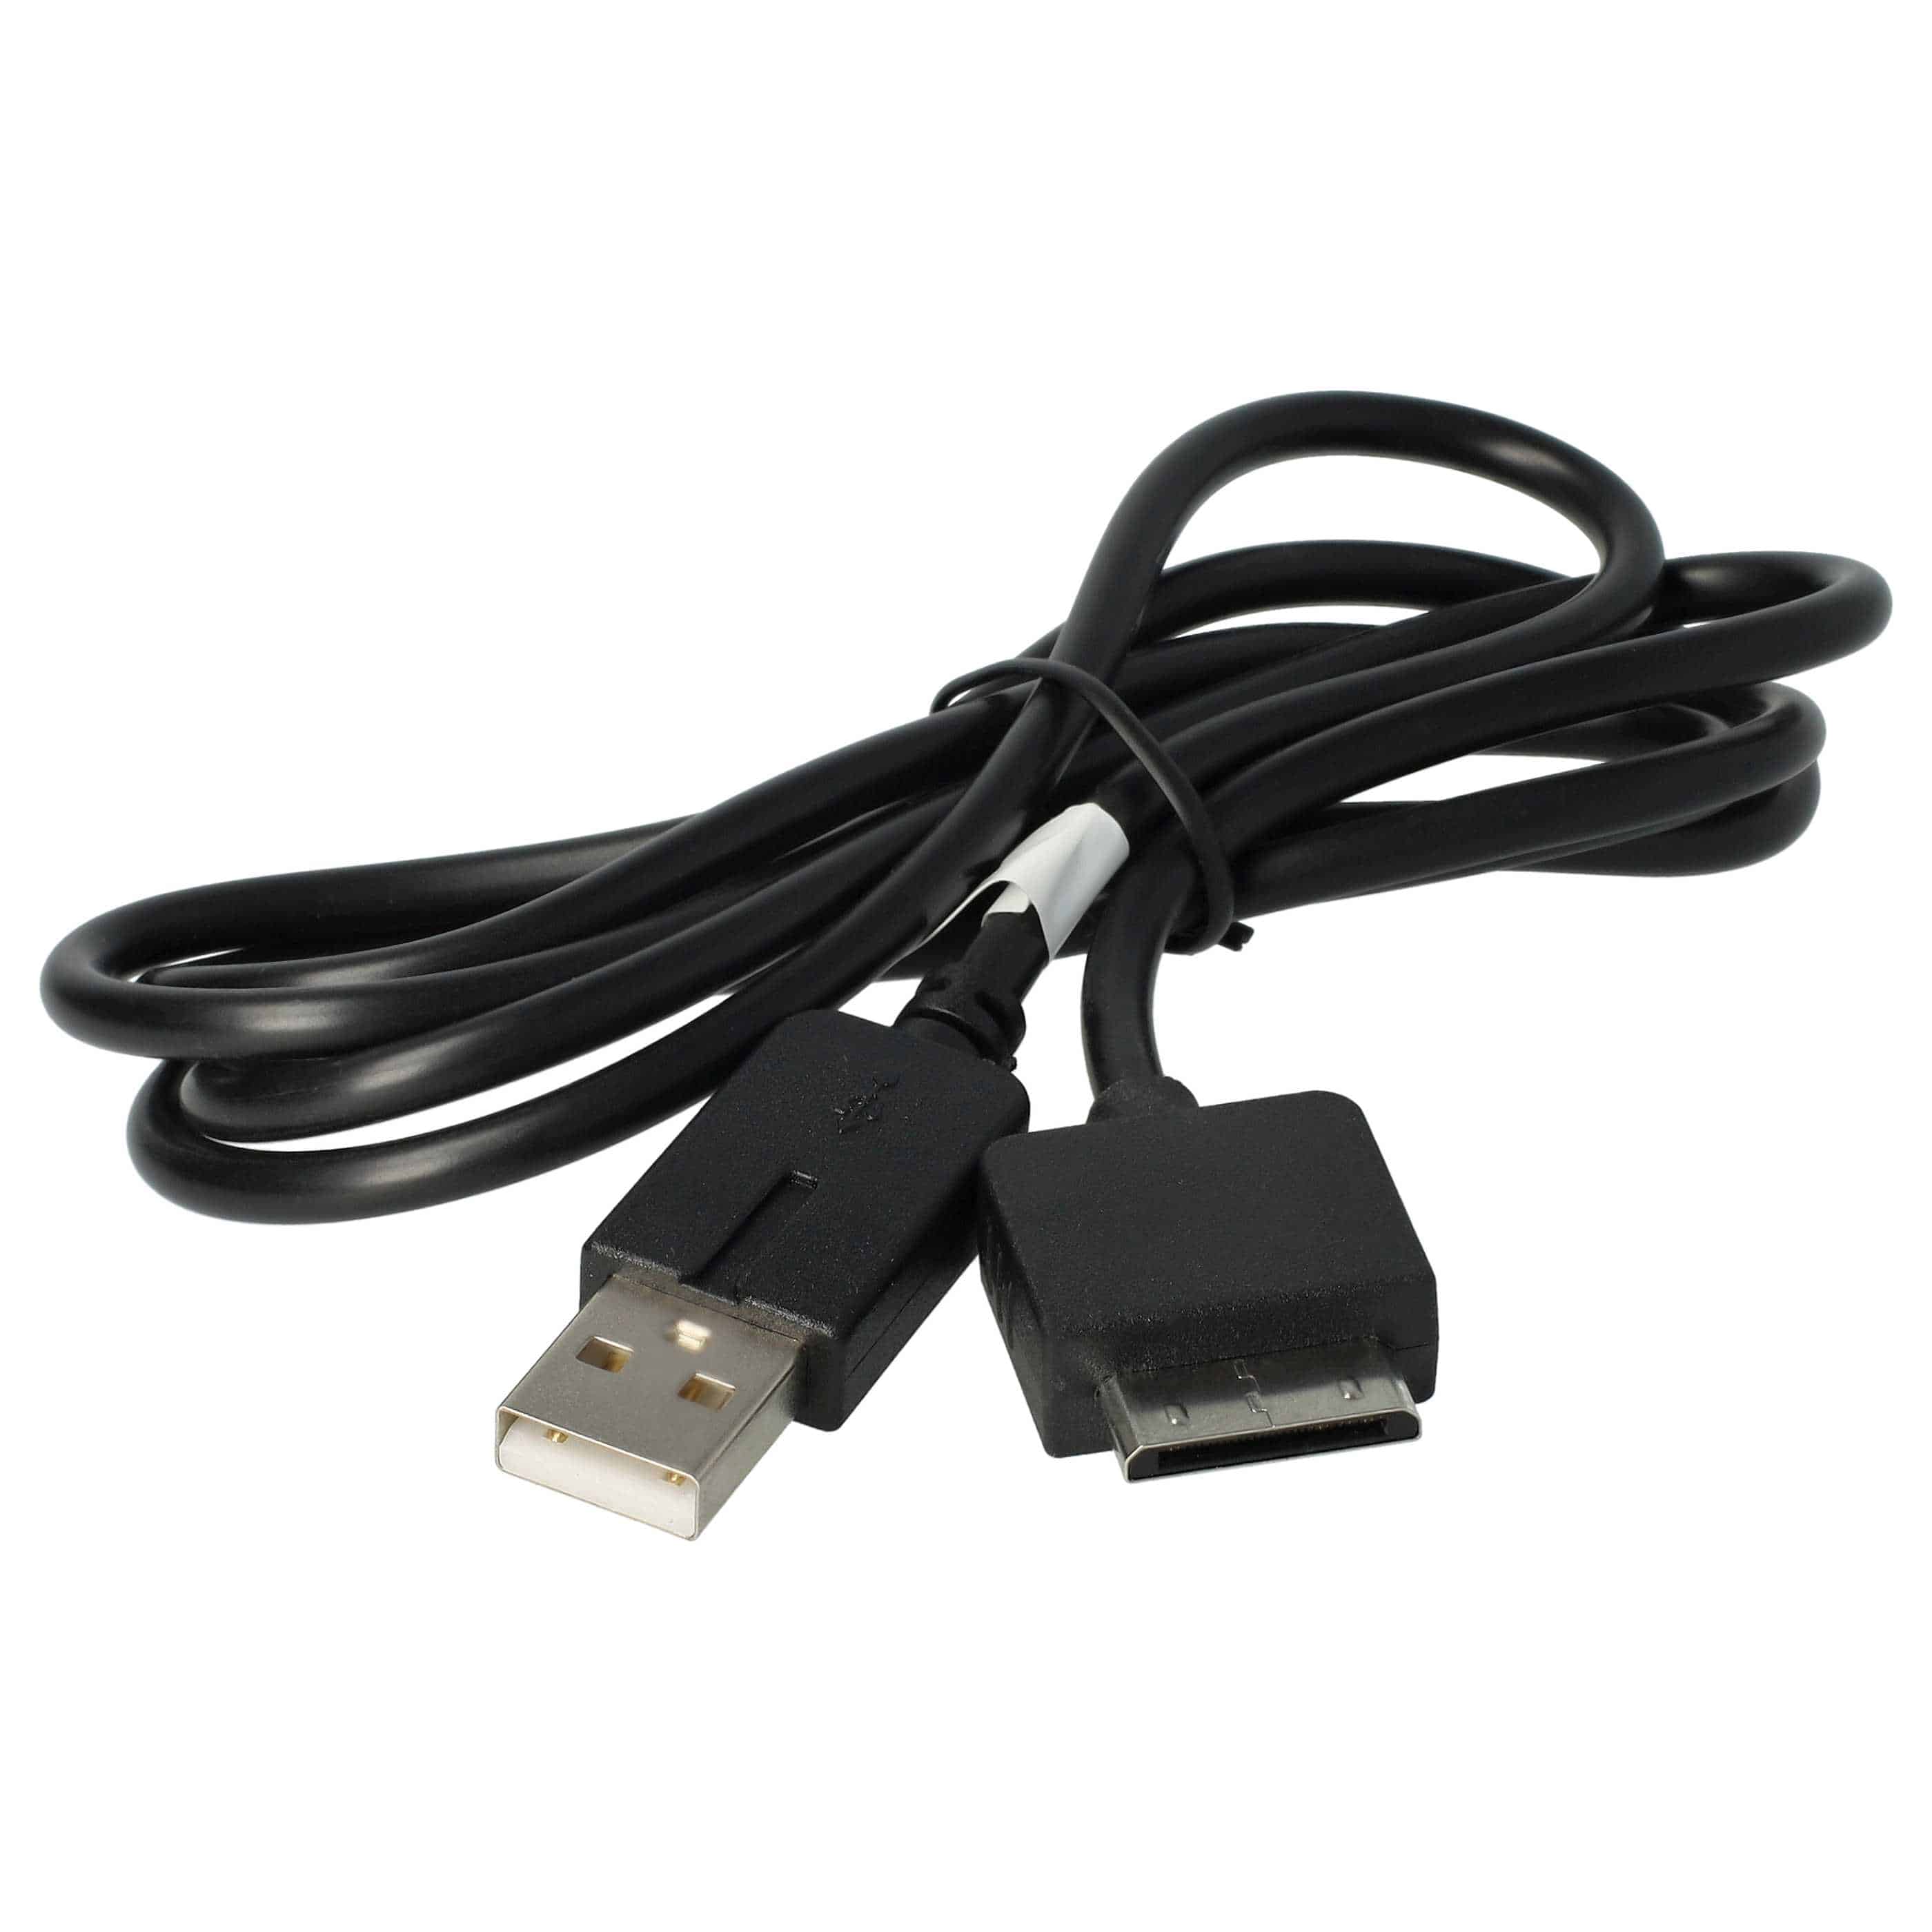 vhbw USB Cable Games Console - 2in1 Data Cable / Charger 1.2m Long